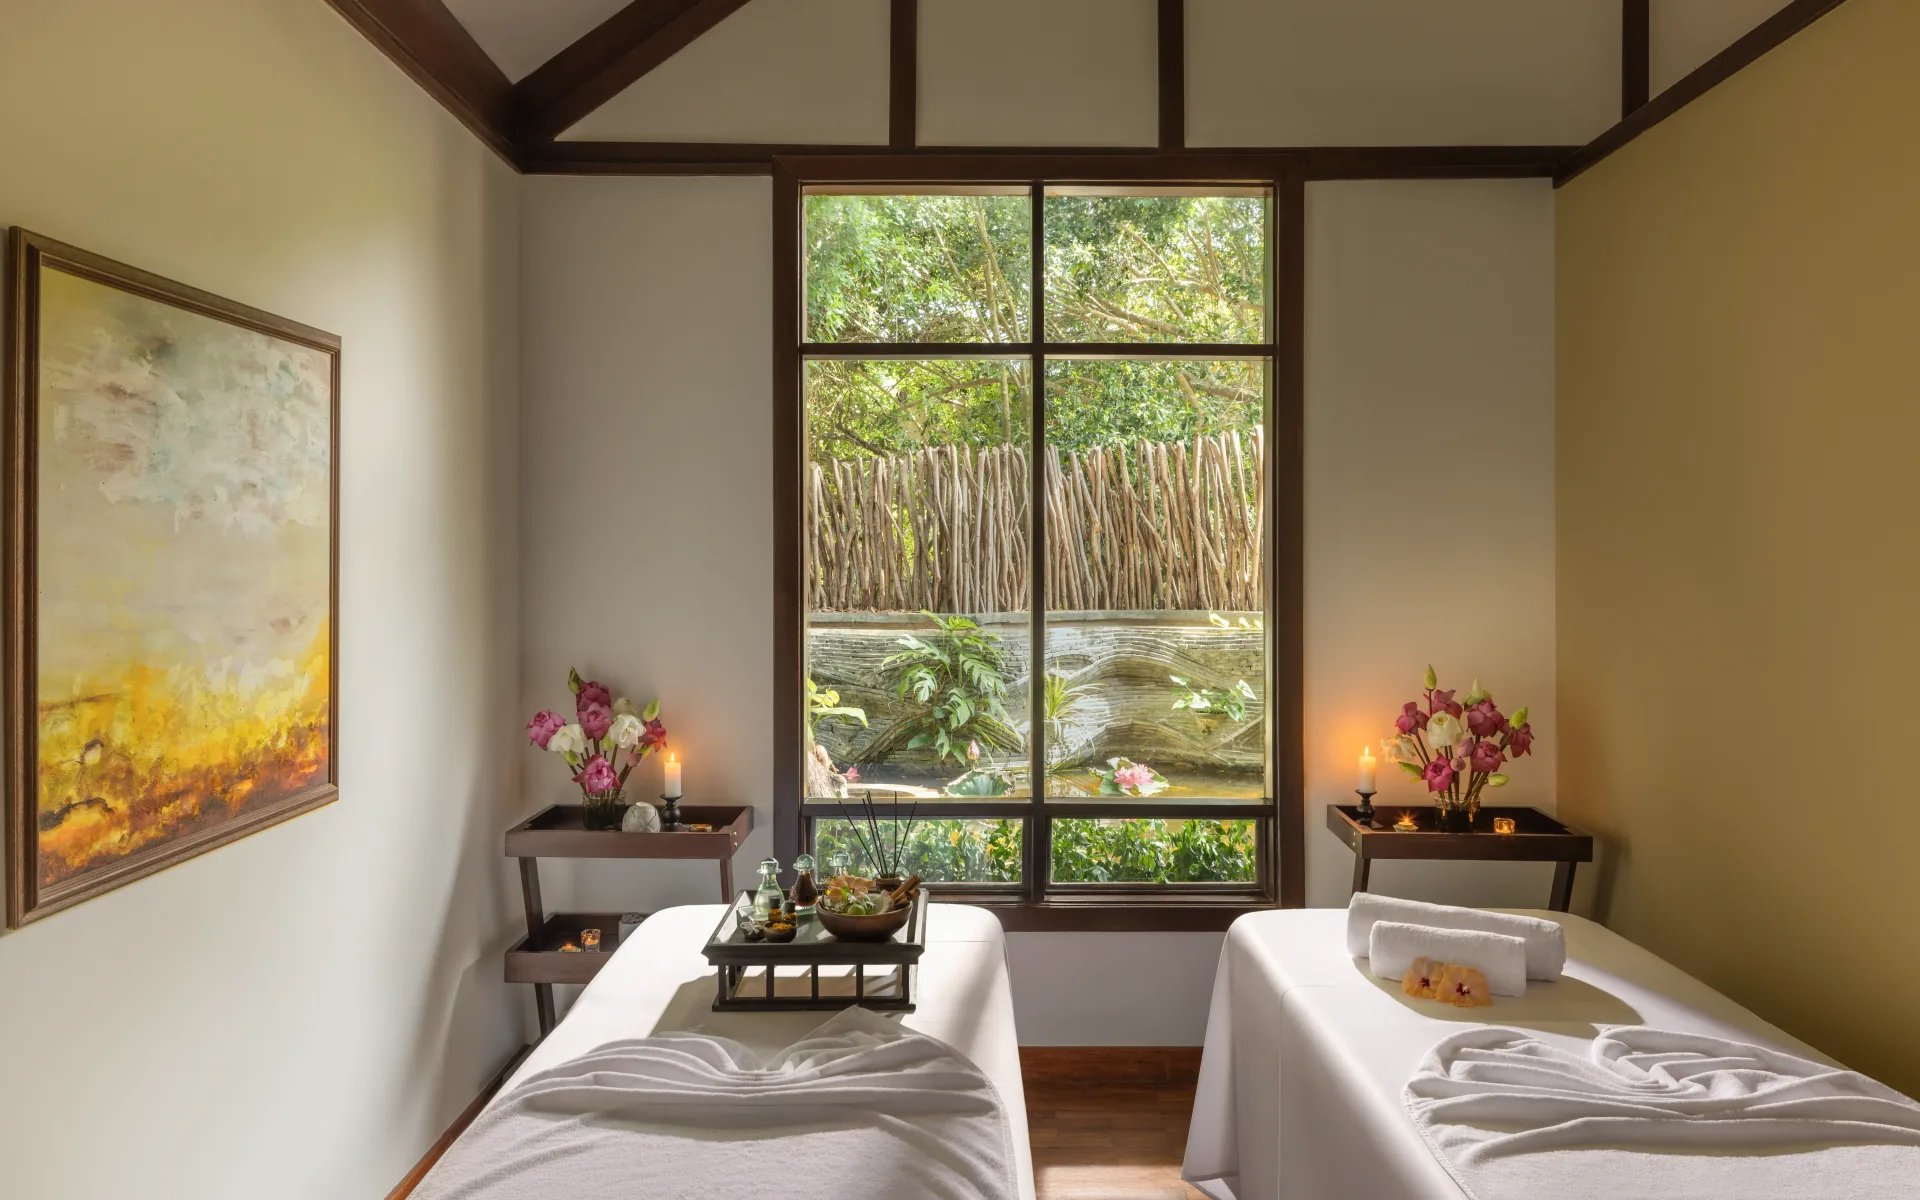 Two massage beds lay in a cosy room. A large window on-looks the surrounding jungle.